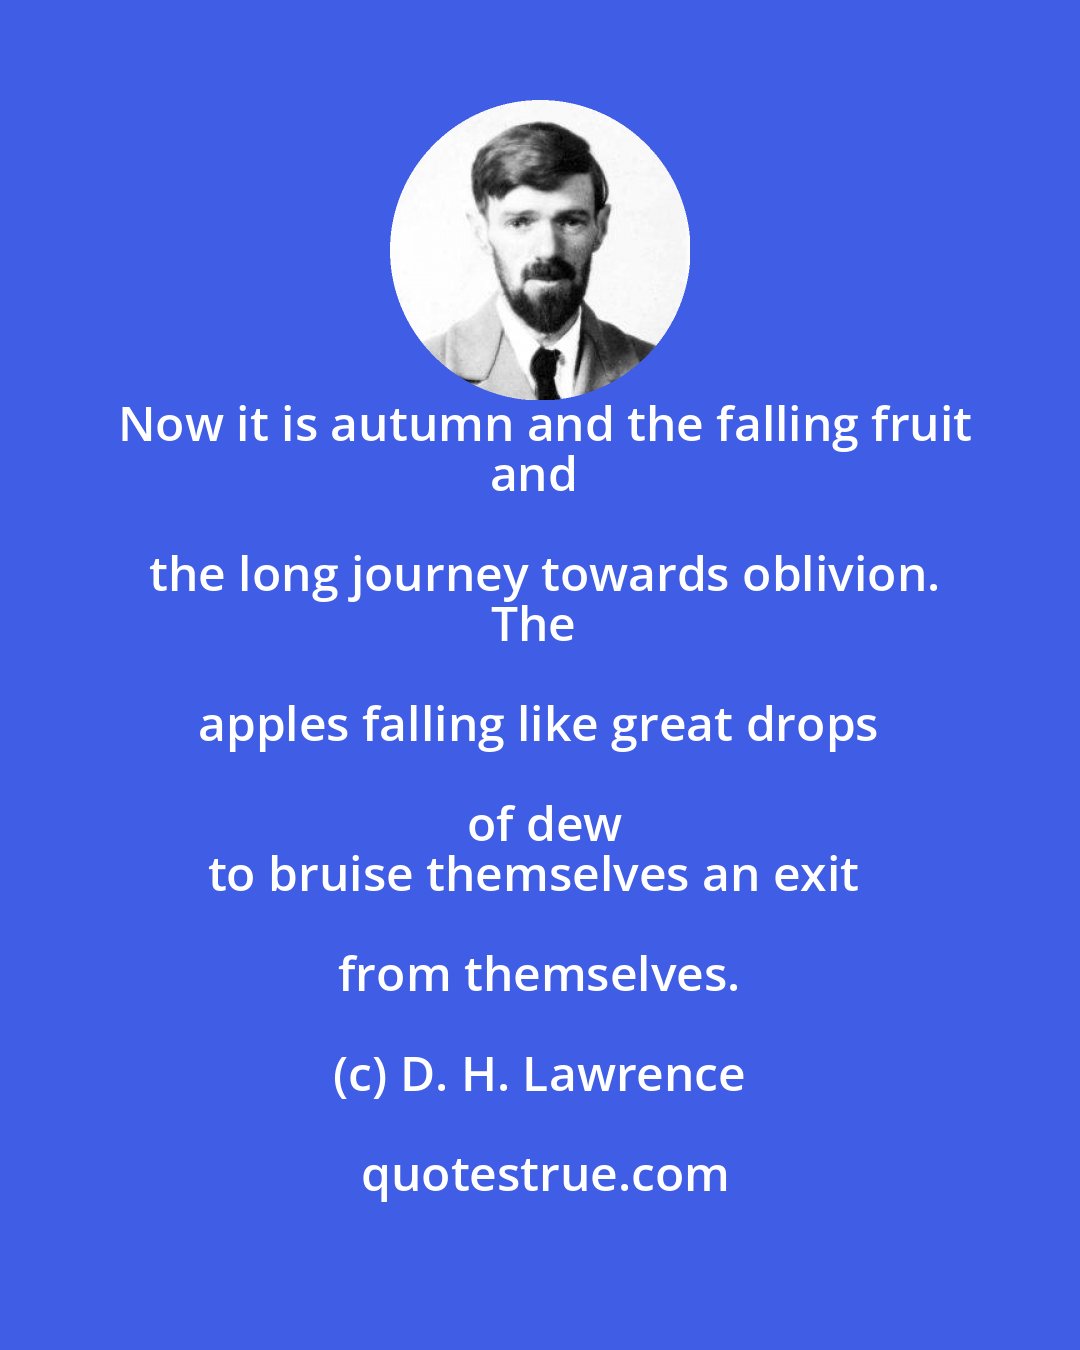 D. H. Lawrence: Now it is autumn and the falling fruit
and the long journey towards oblivion.
The apples falling like great drops of dew
to bruise themselves an exit from themselves.